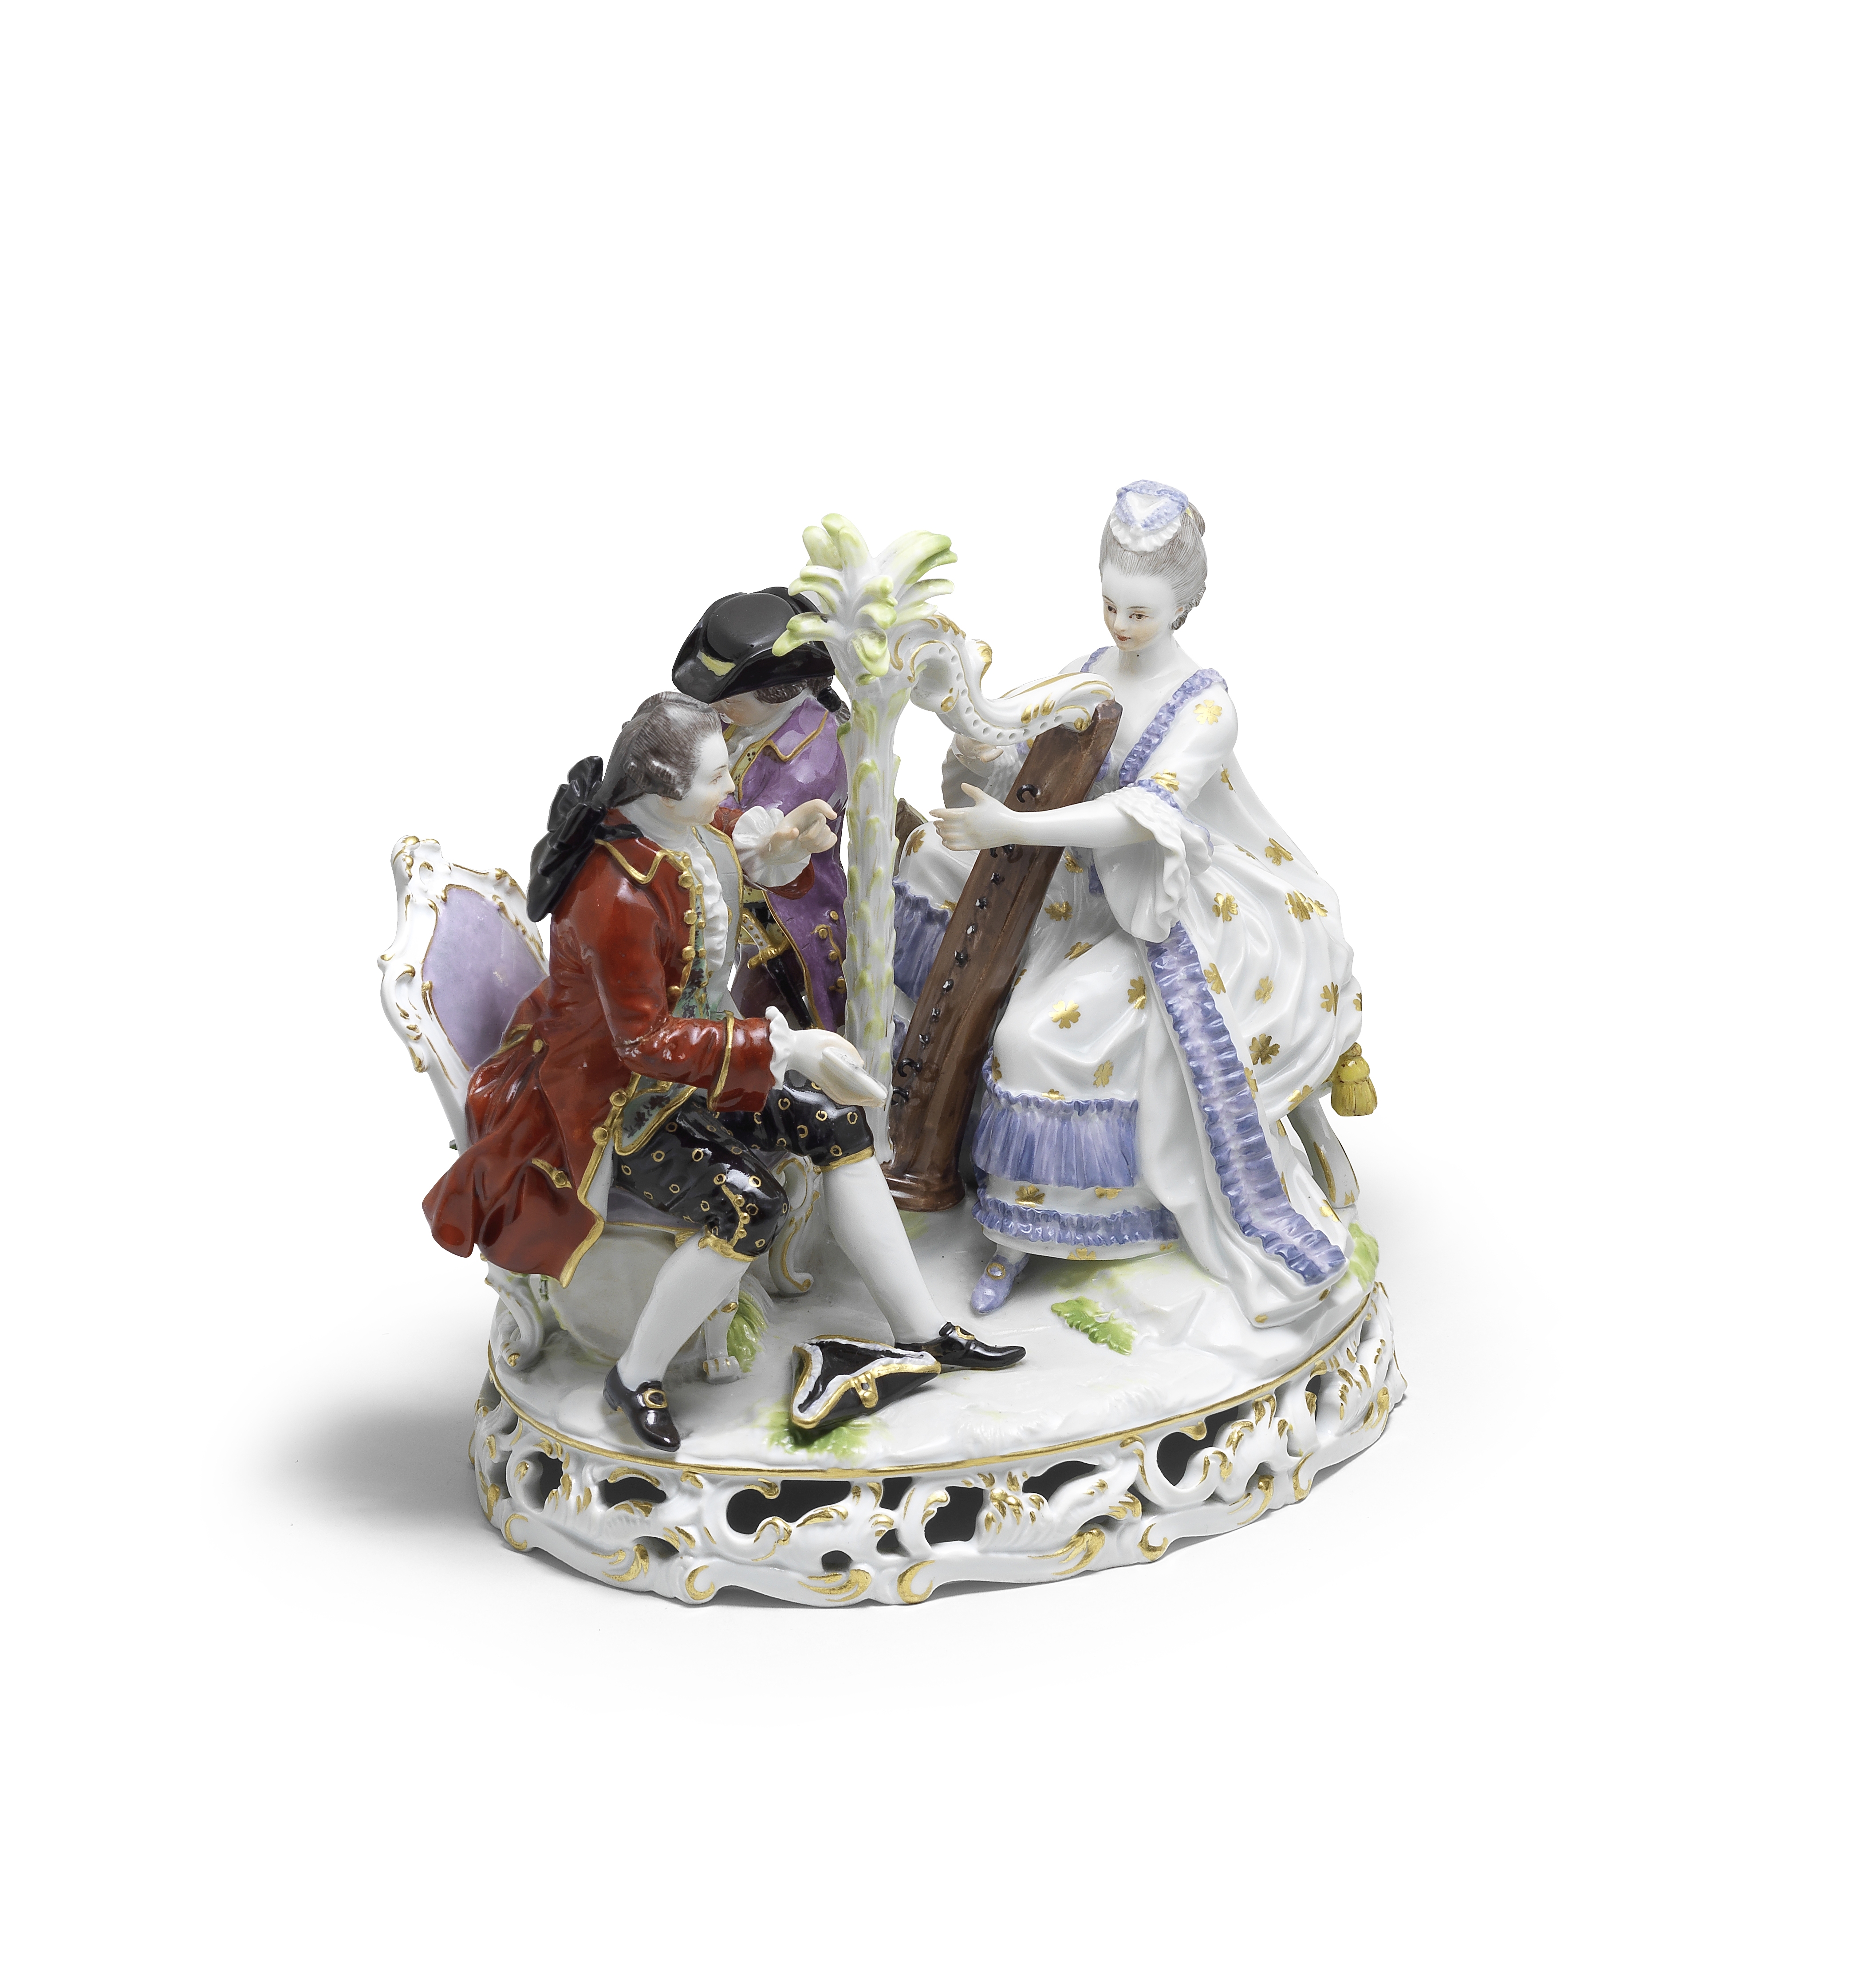 Two Meissen groups of couples, late 19th century